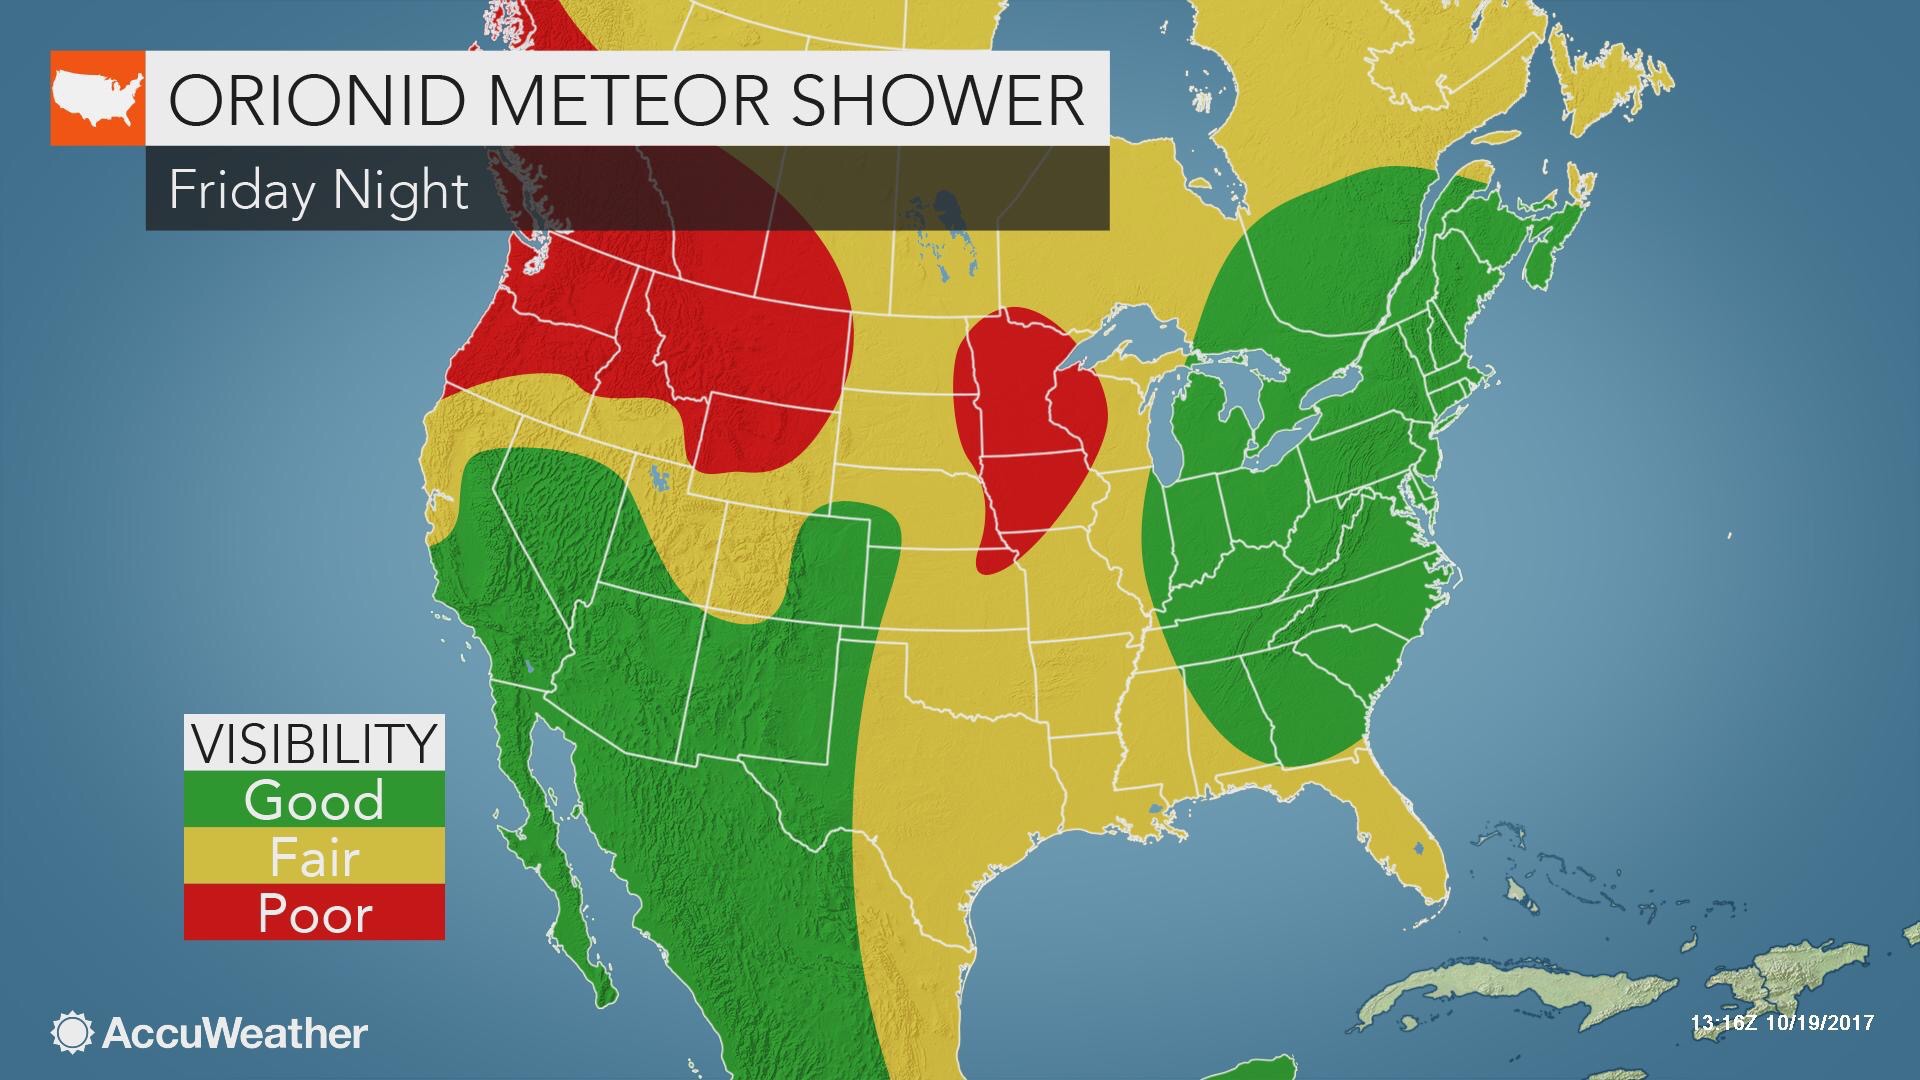 Weather conditions may be best for us overnight Friday as the Orionids shower builds towards its peak. https://www.accuweather.com/